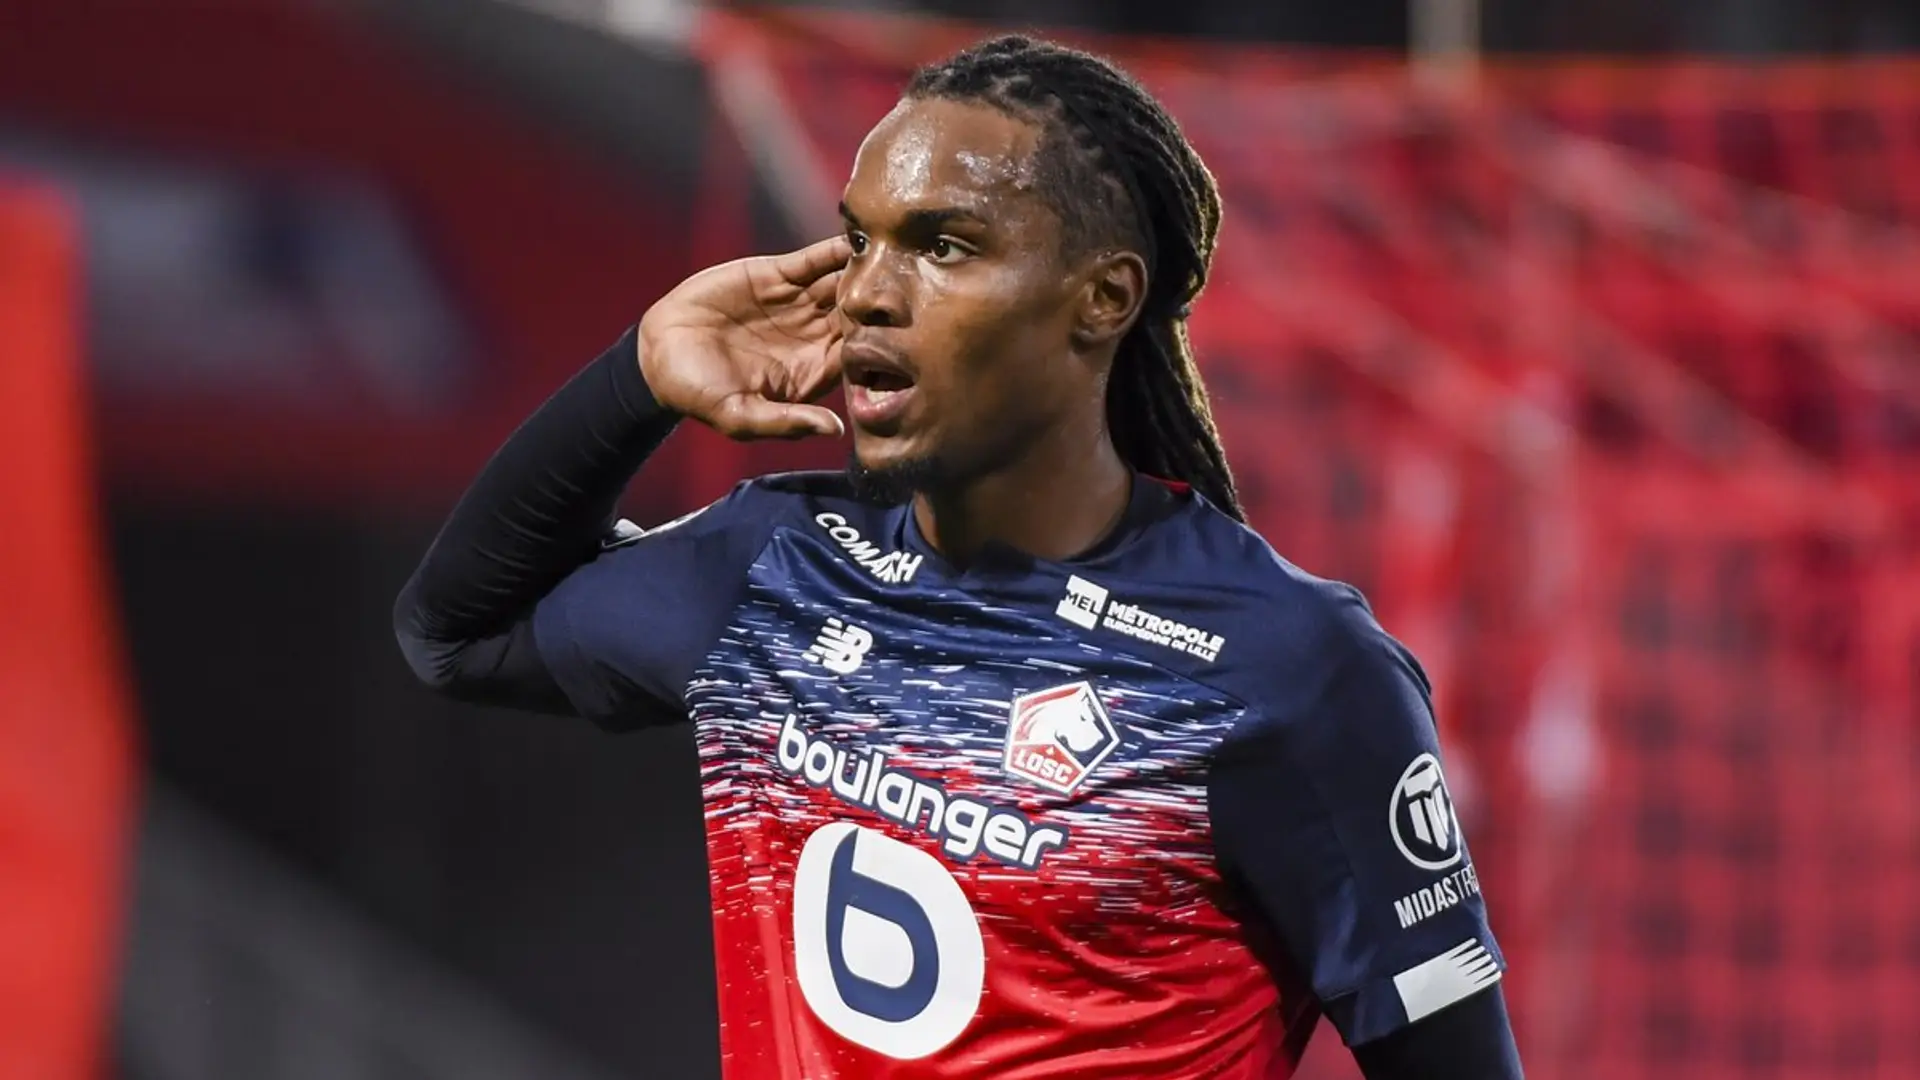 Former Bayern Munich midfielder Renato Sanches among 3 Lille players tested positive for coronavirus